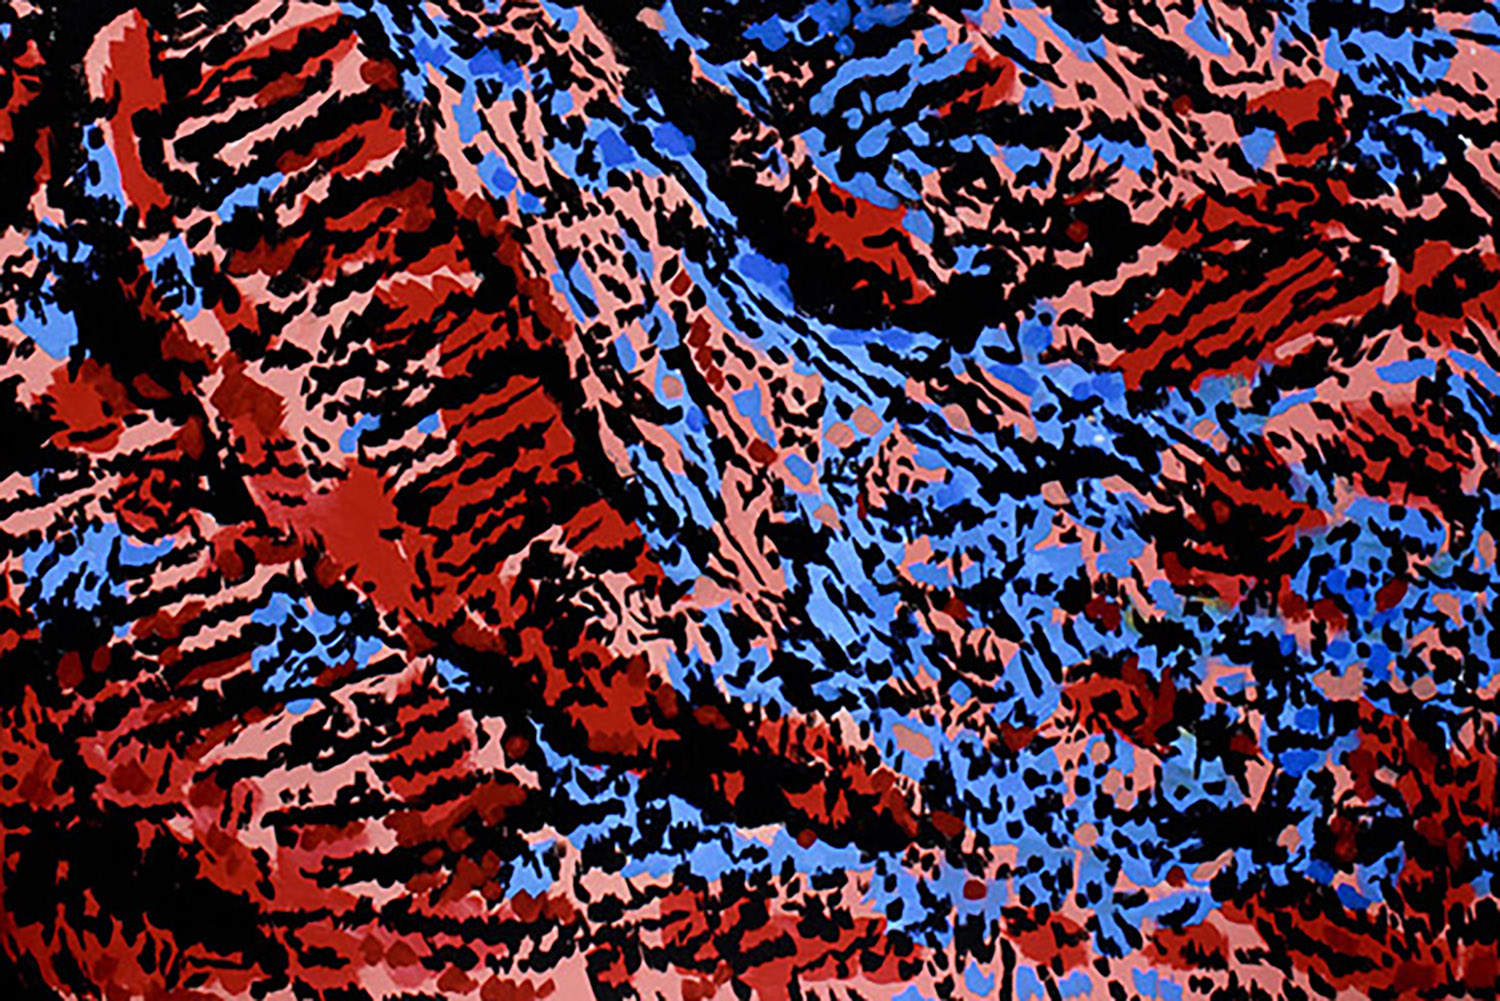 Abrstract red, pink, blue and black painting by Avery Lawrance